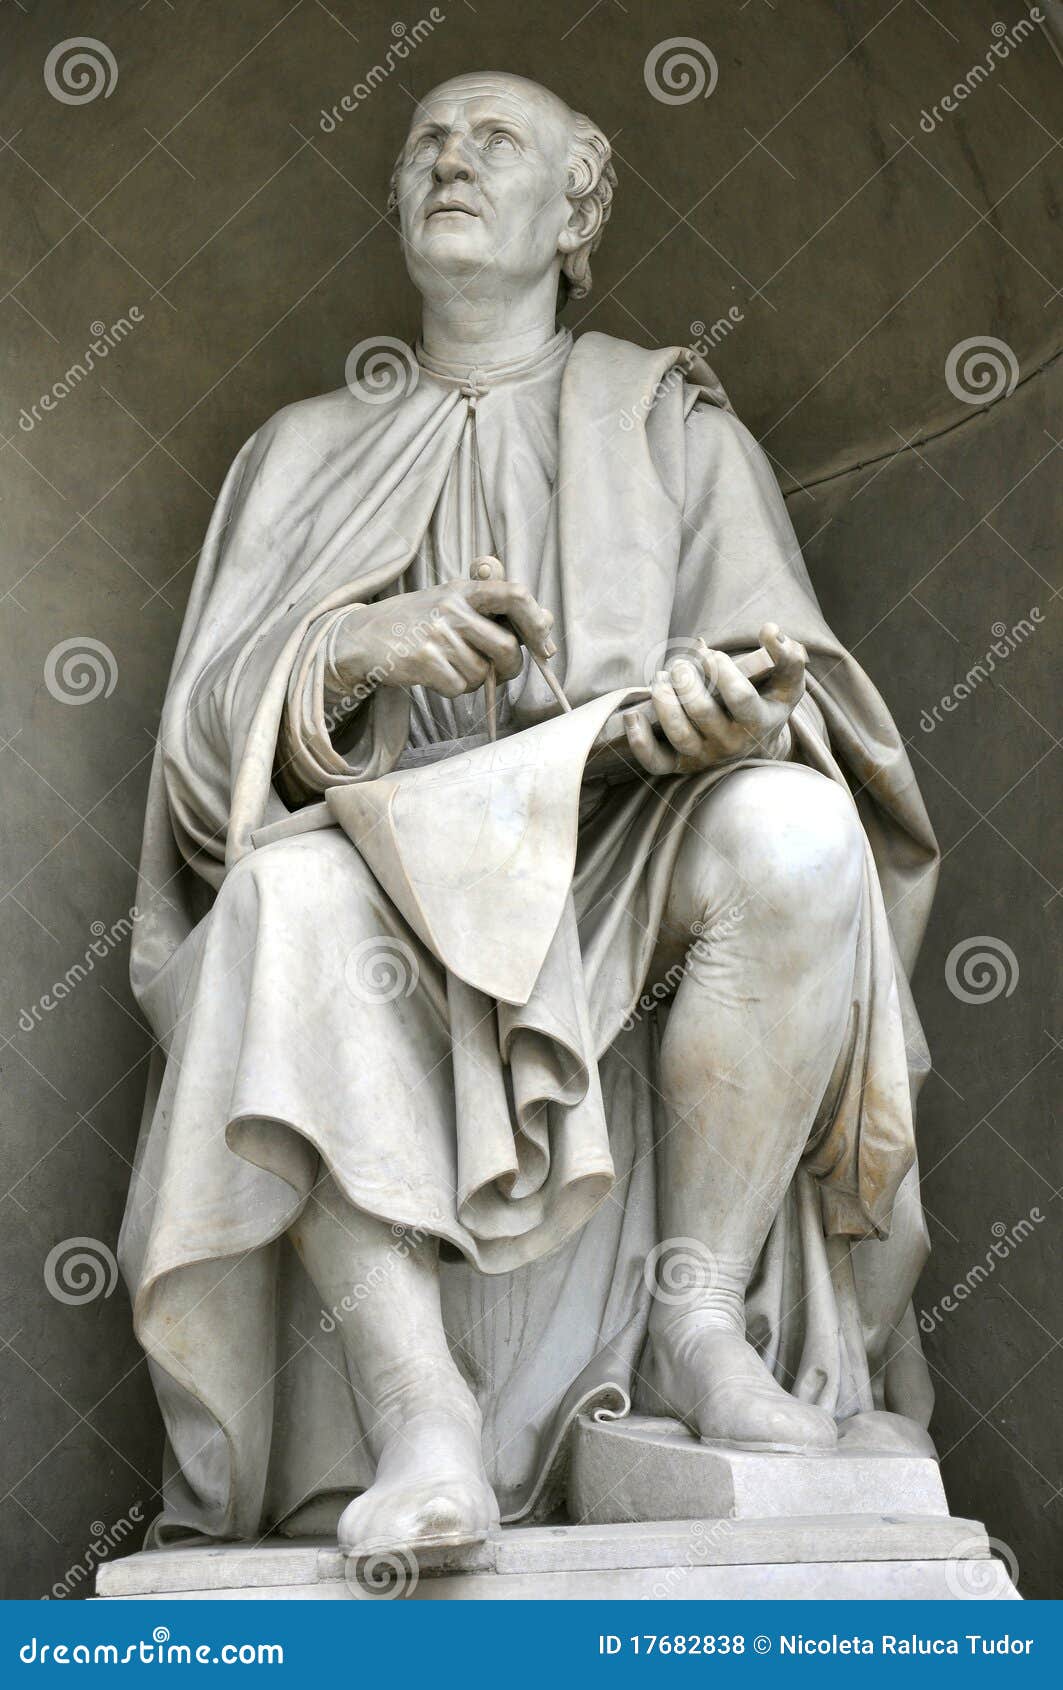 brunelleschi statue in florence city, italy